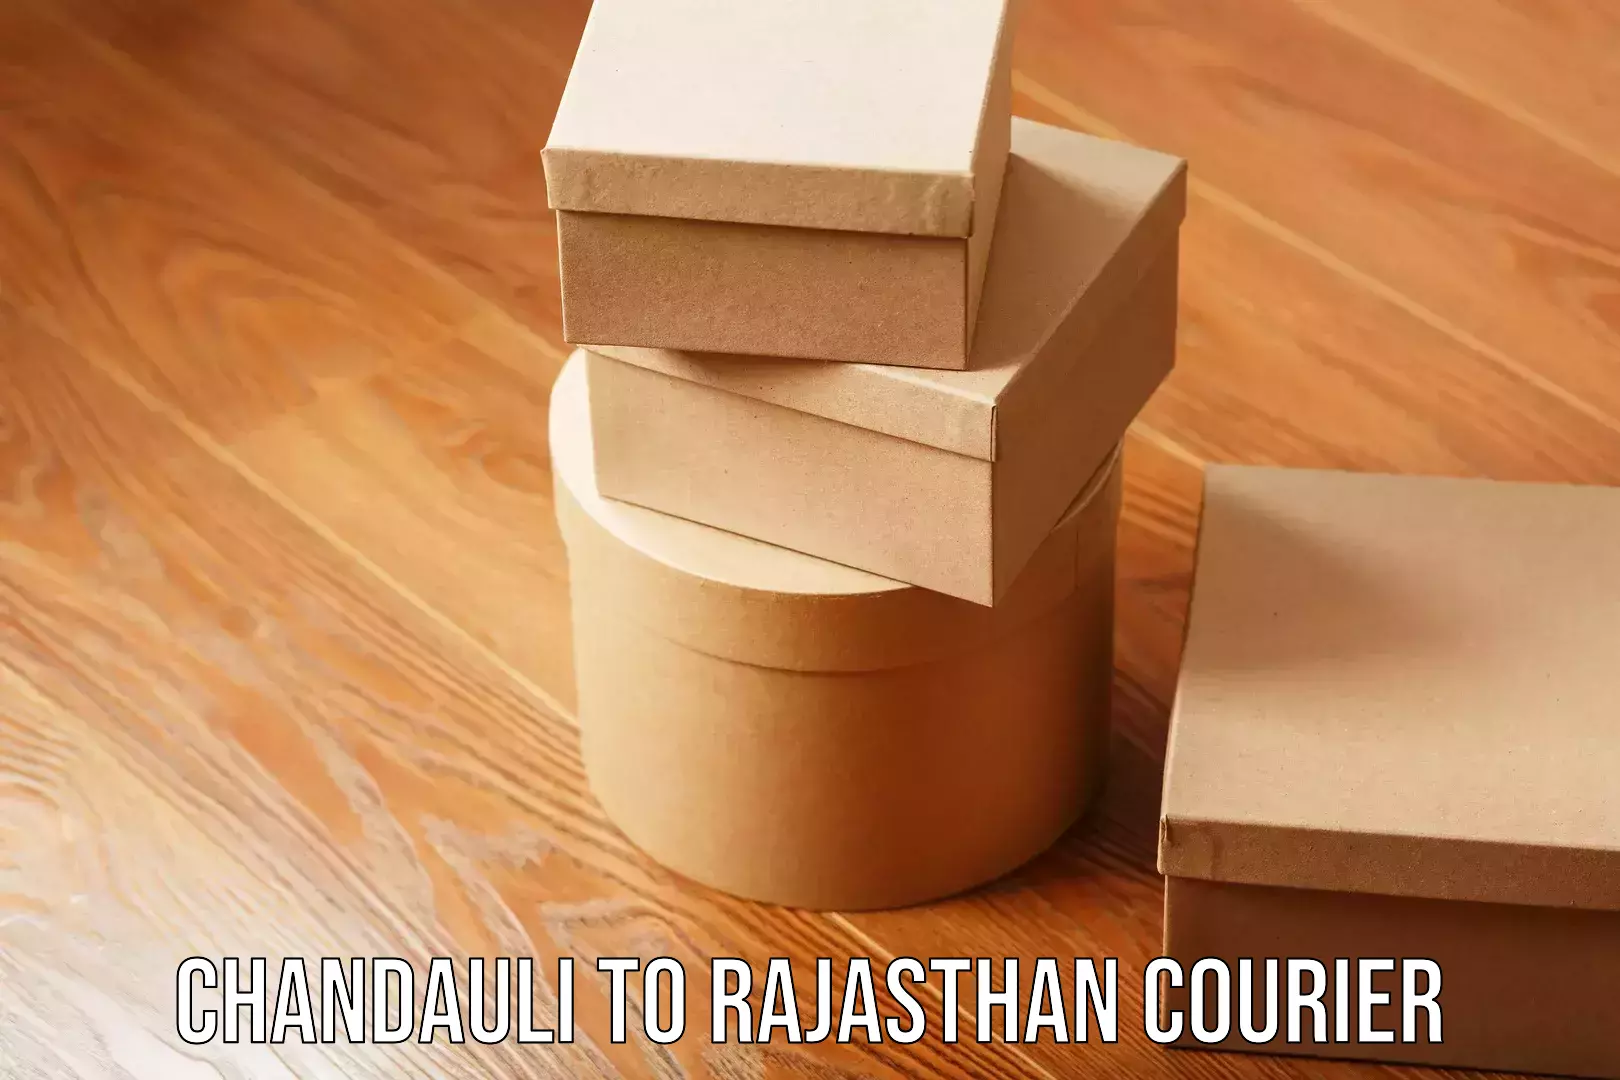 Ocean freight courier Chandauli to Rajasthan